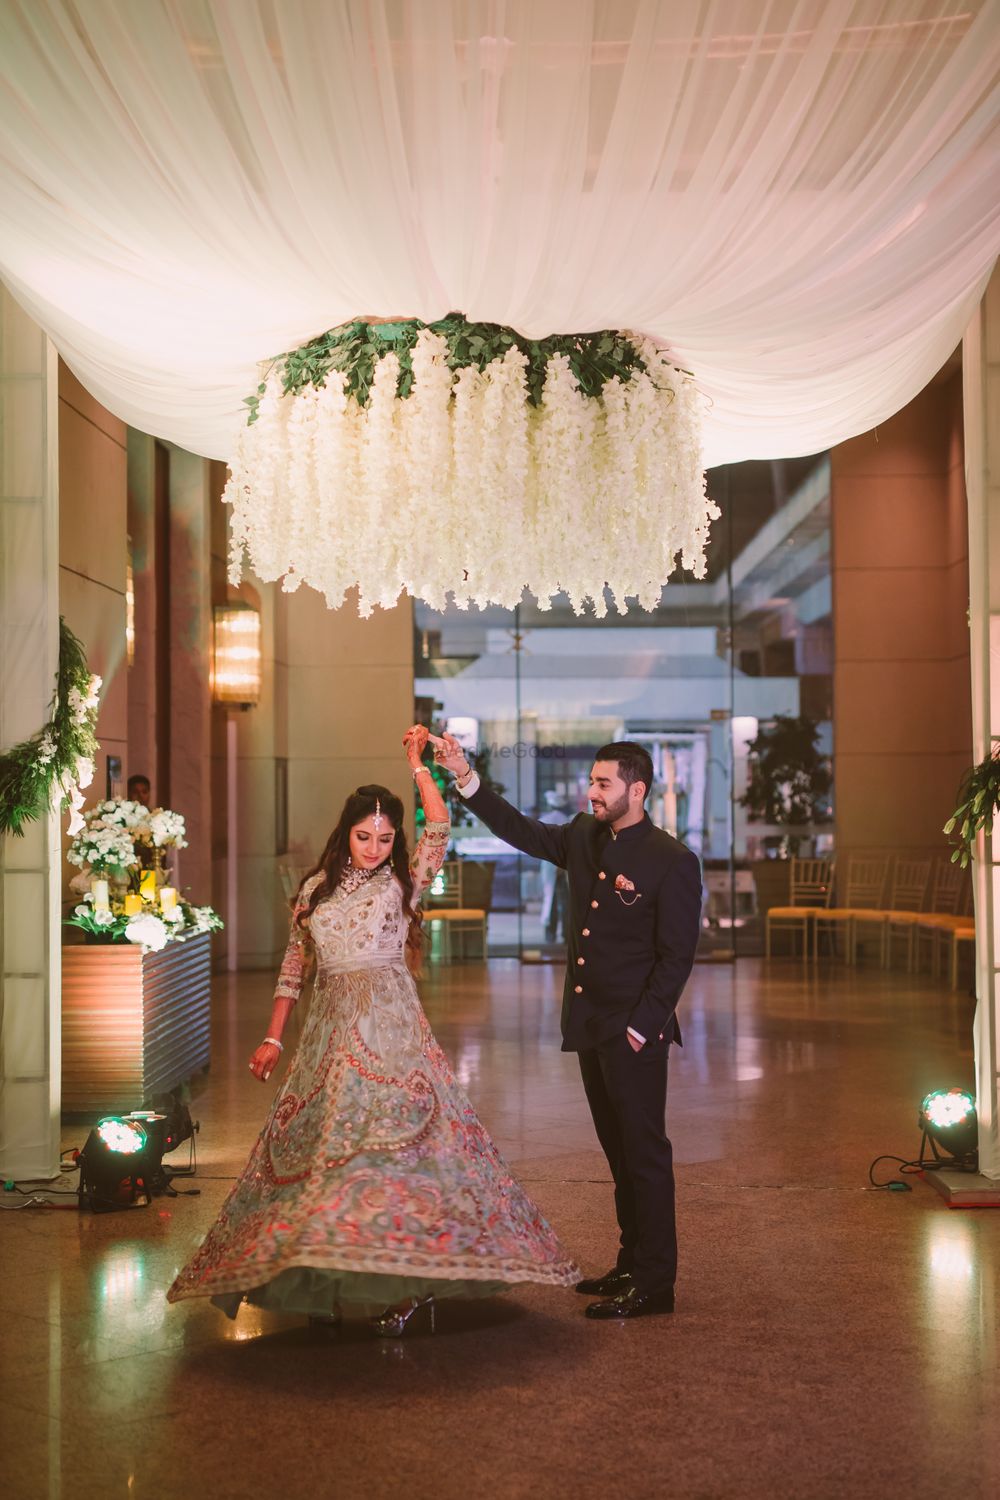 Photo of Couple dancing under floral chandelier